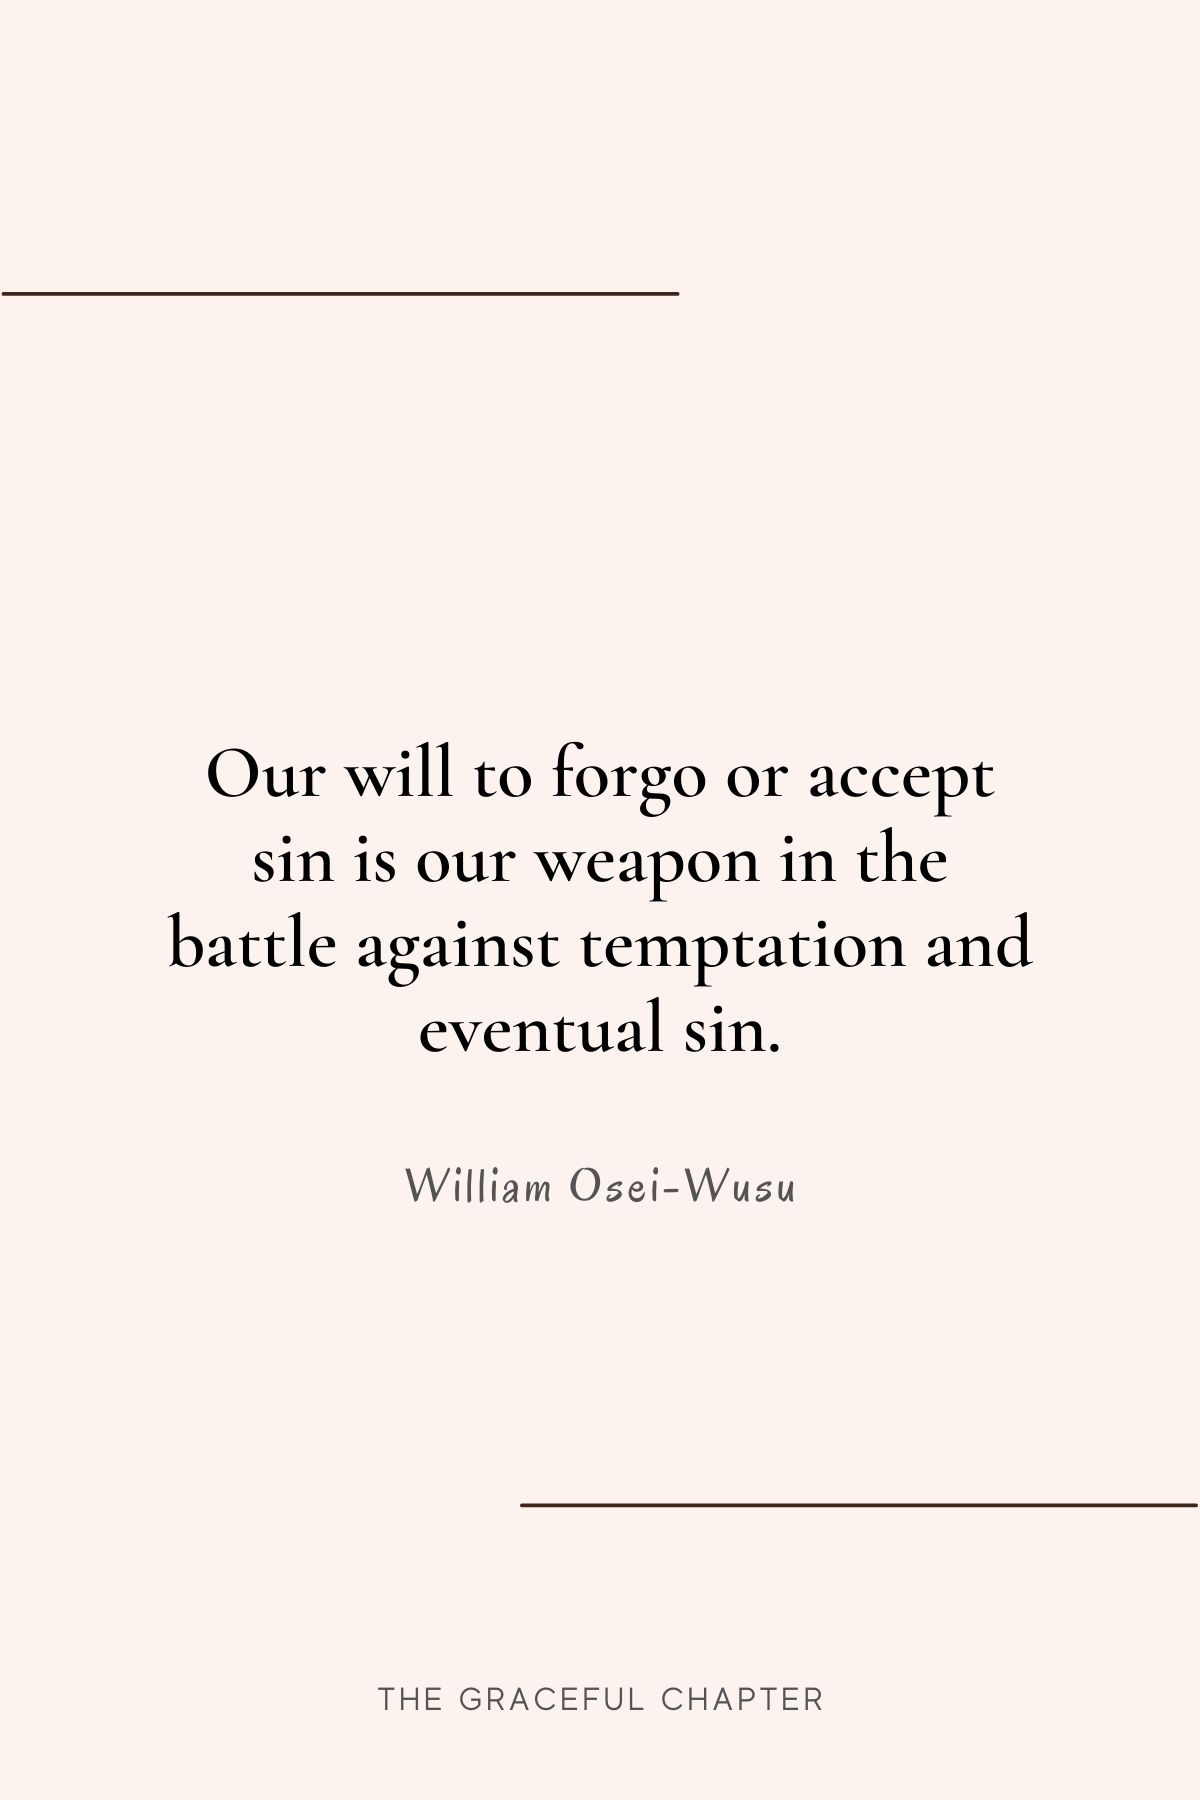 Our will to forgo or accept sin is our weapon in the battle against temptation and eventual sin. William Osei-Wusu